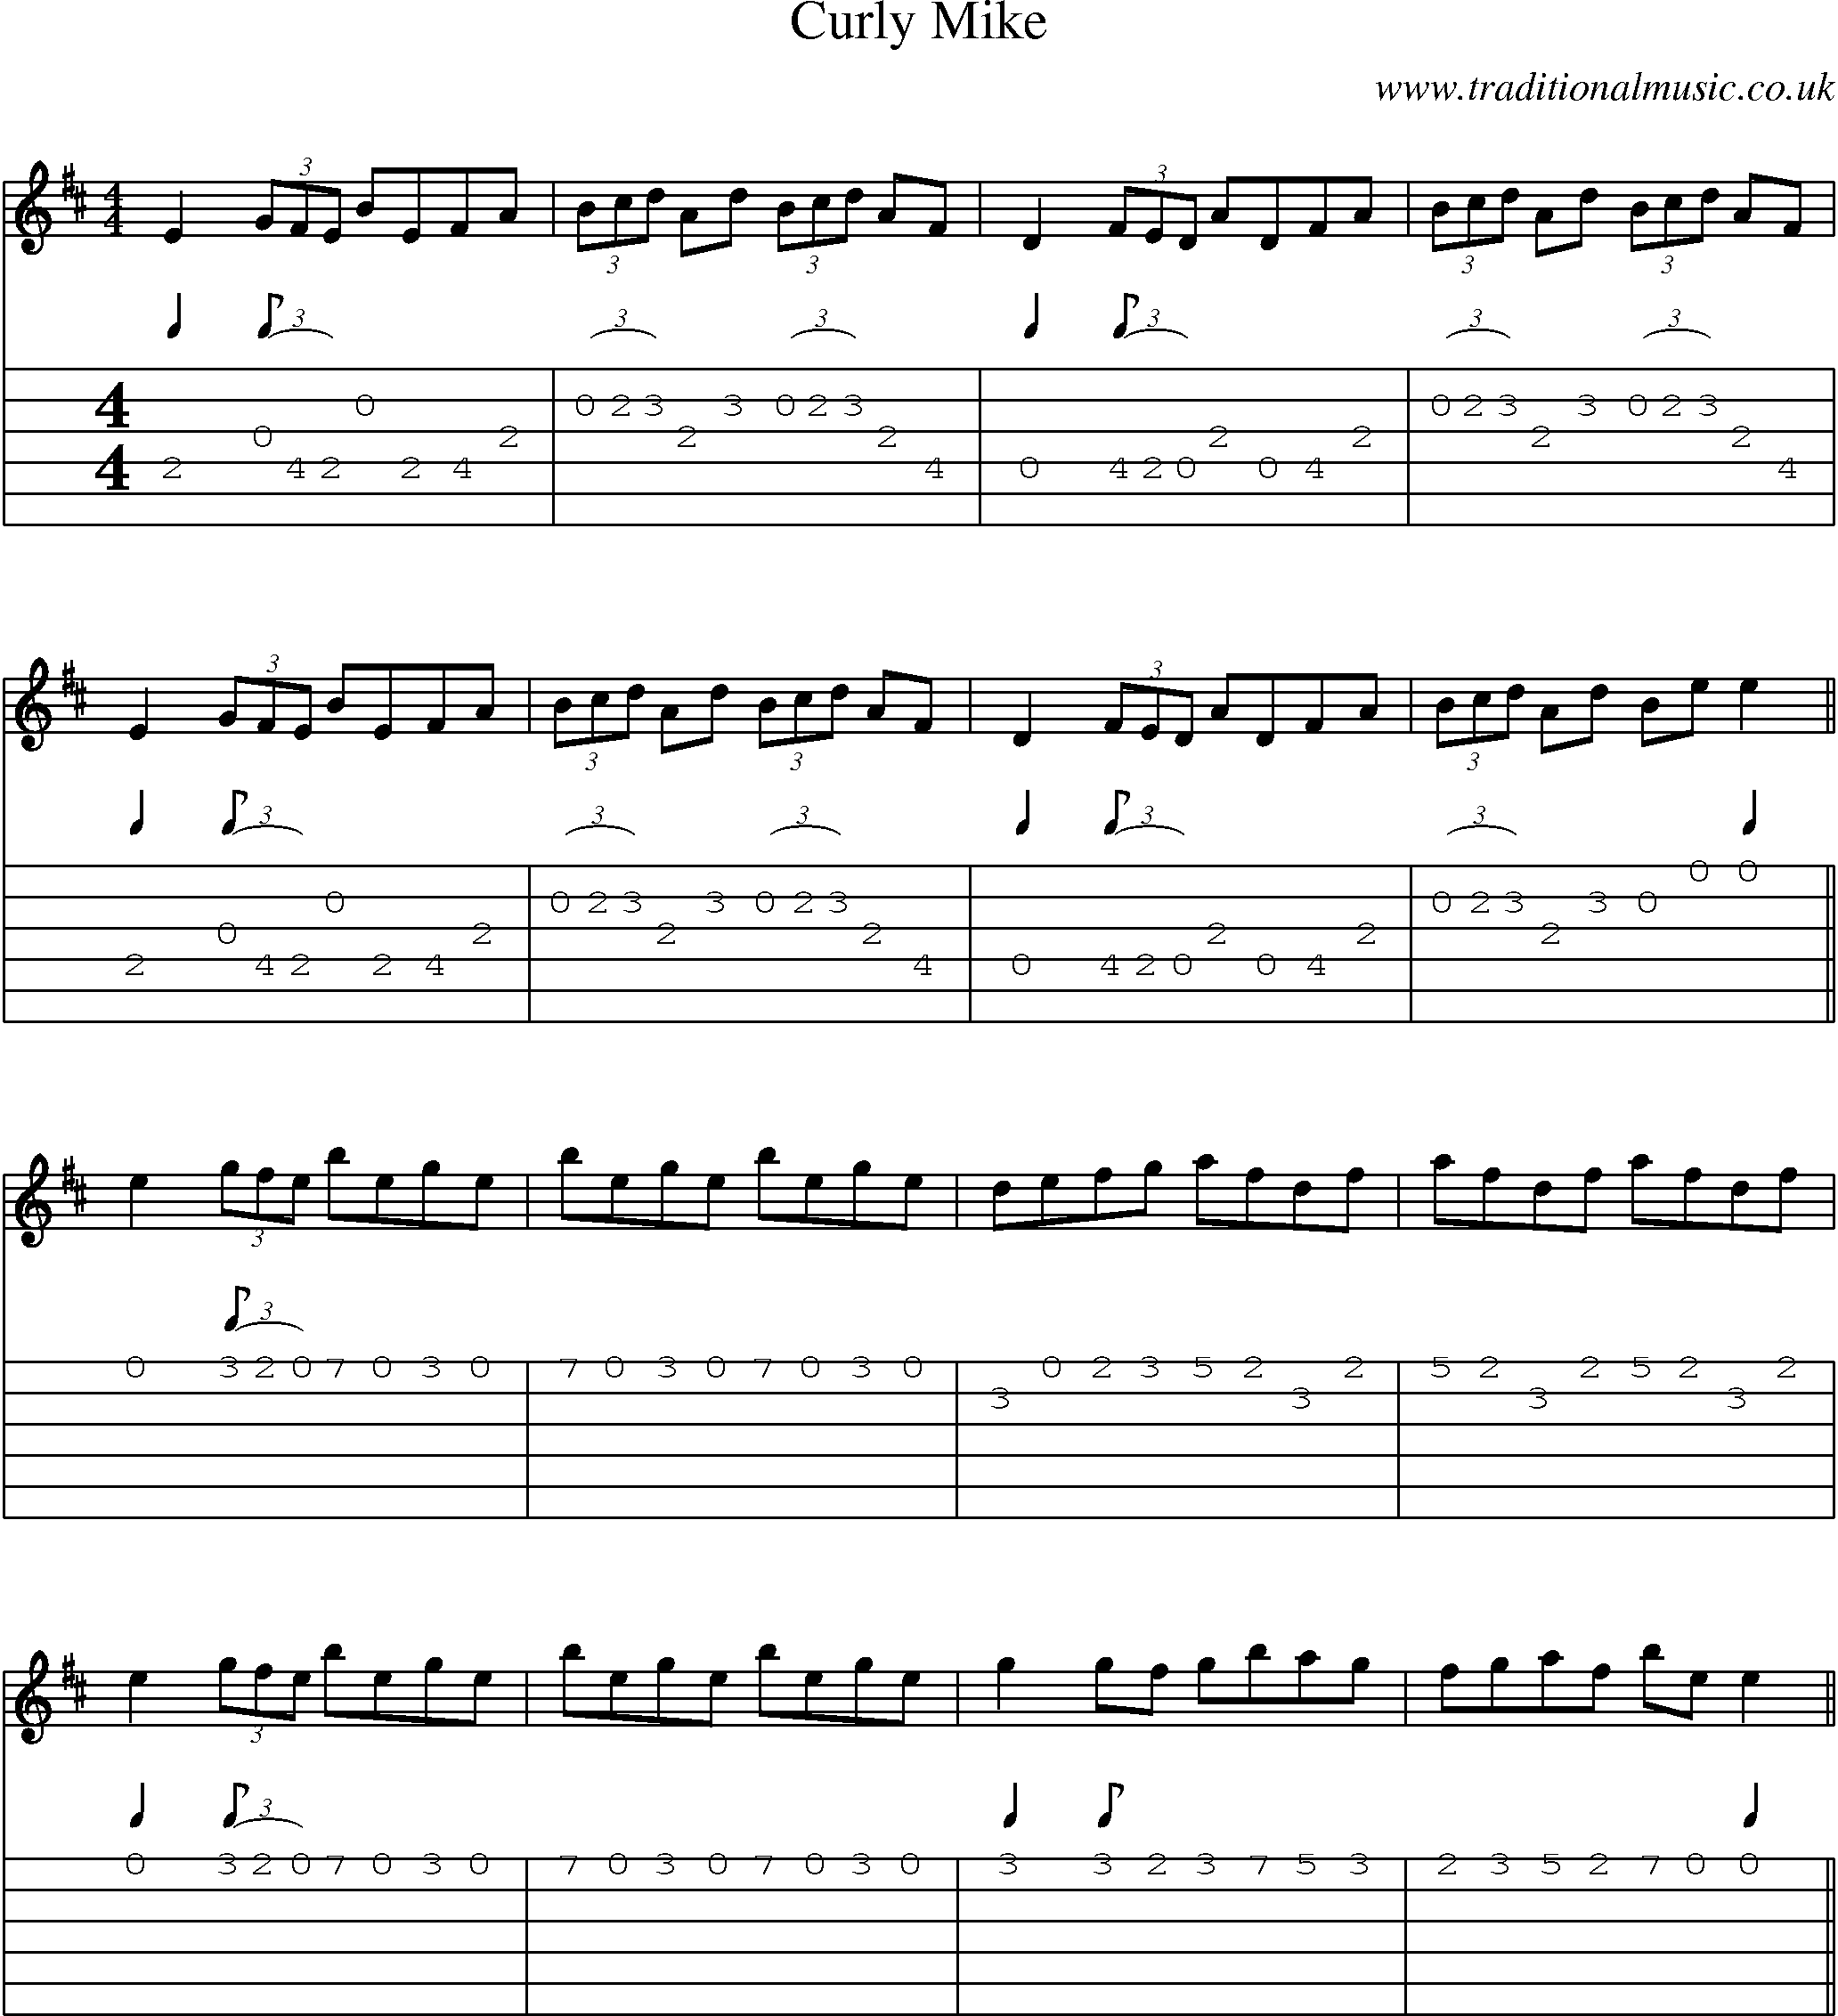 Music Score and Guitar Tabs for Curly Mike